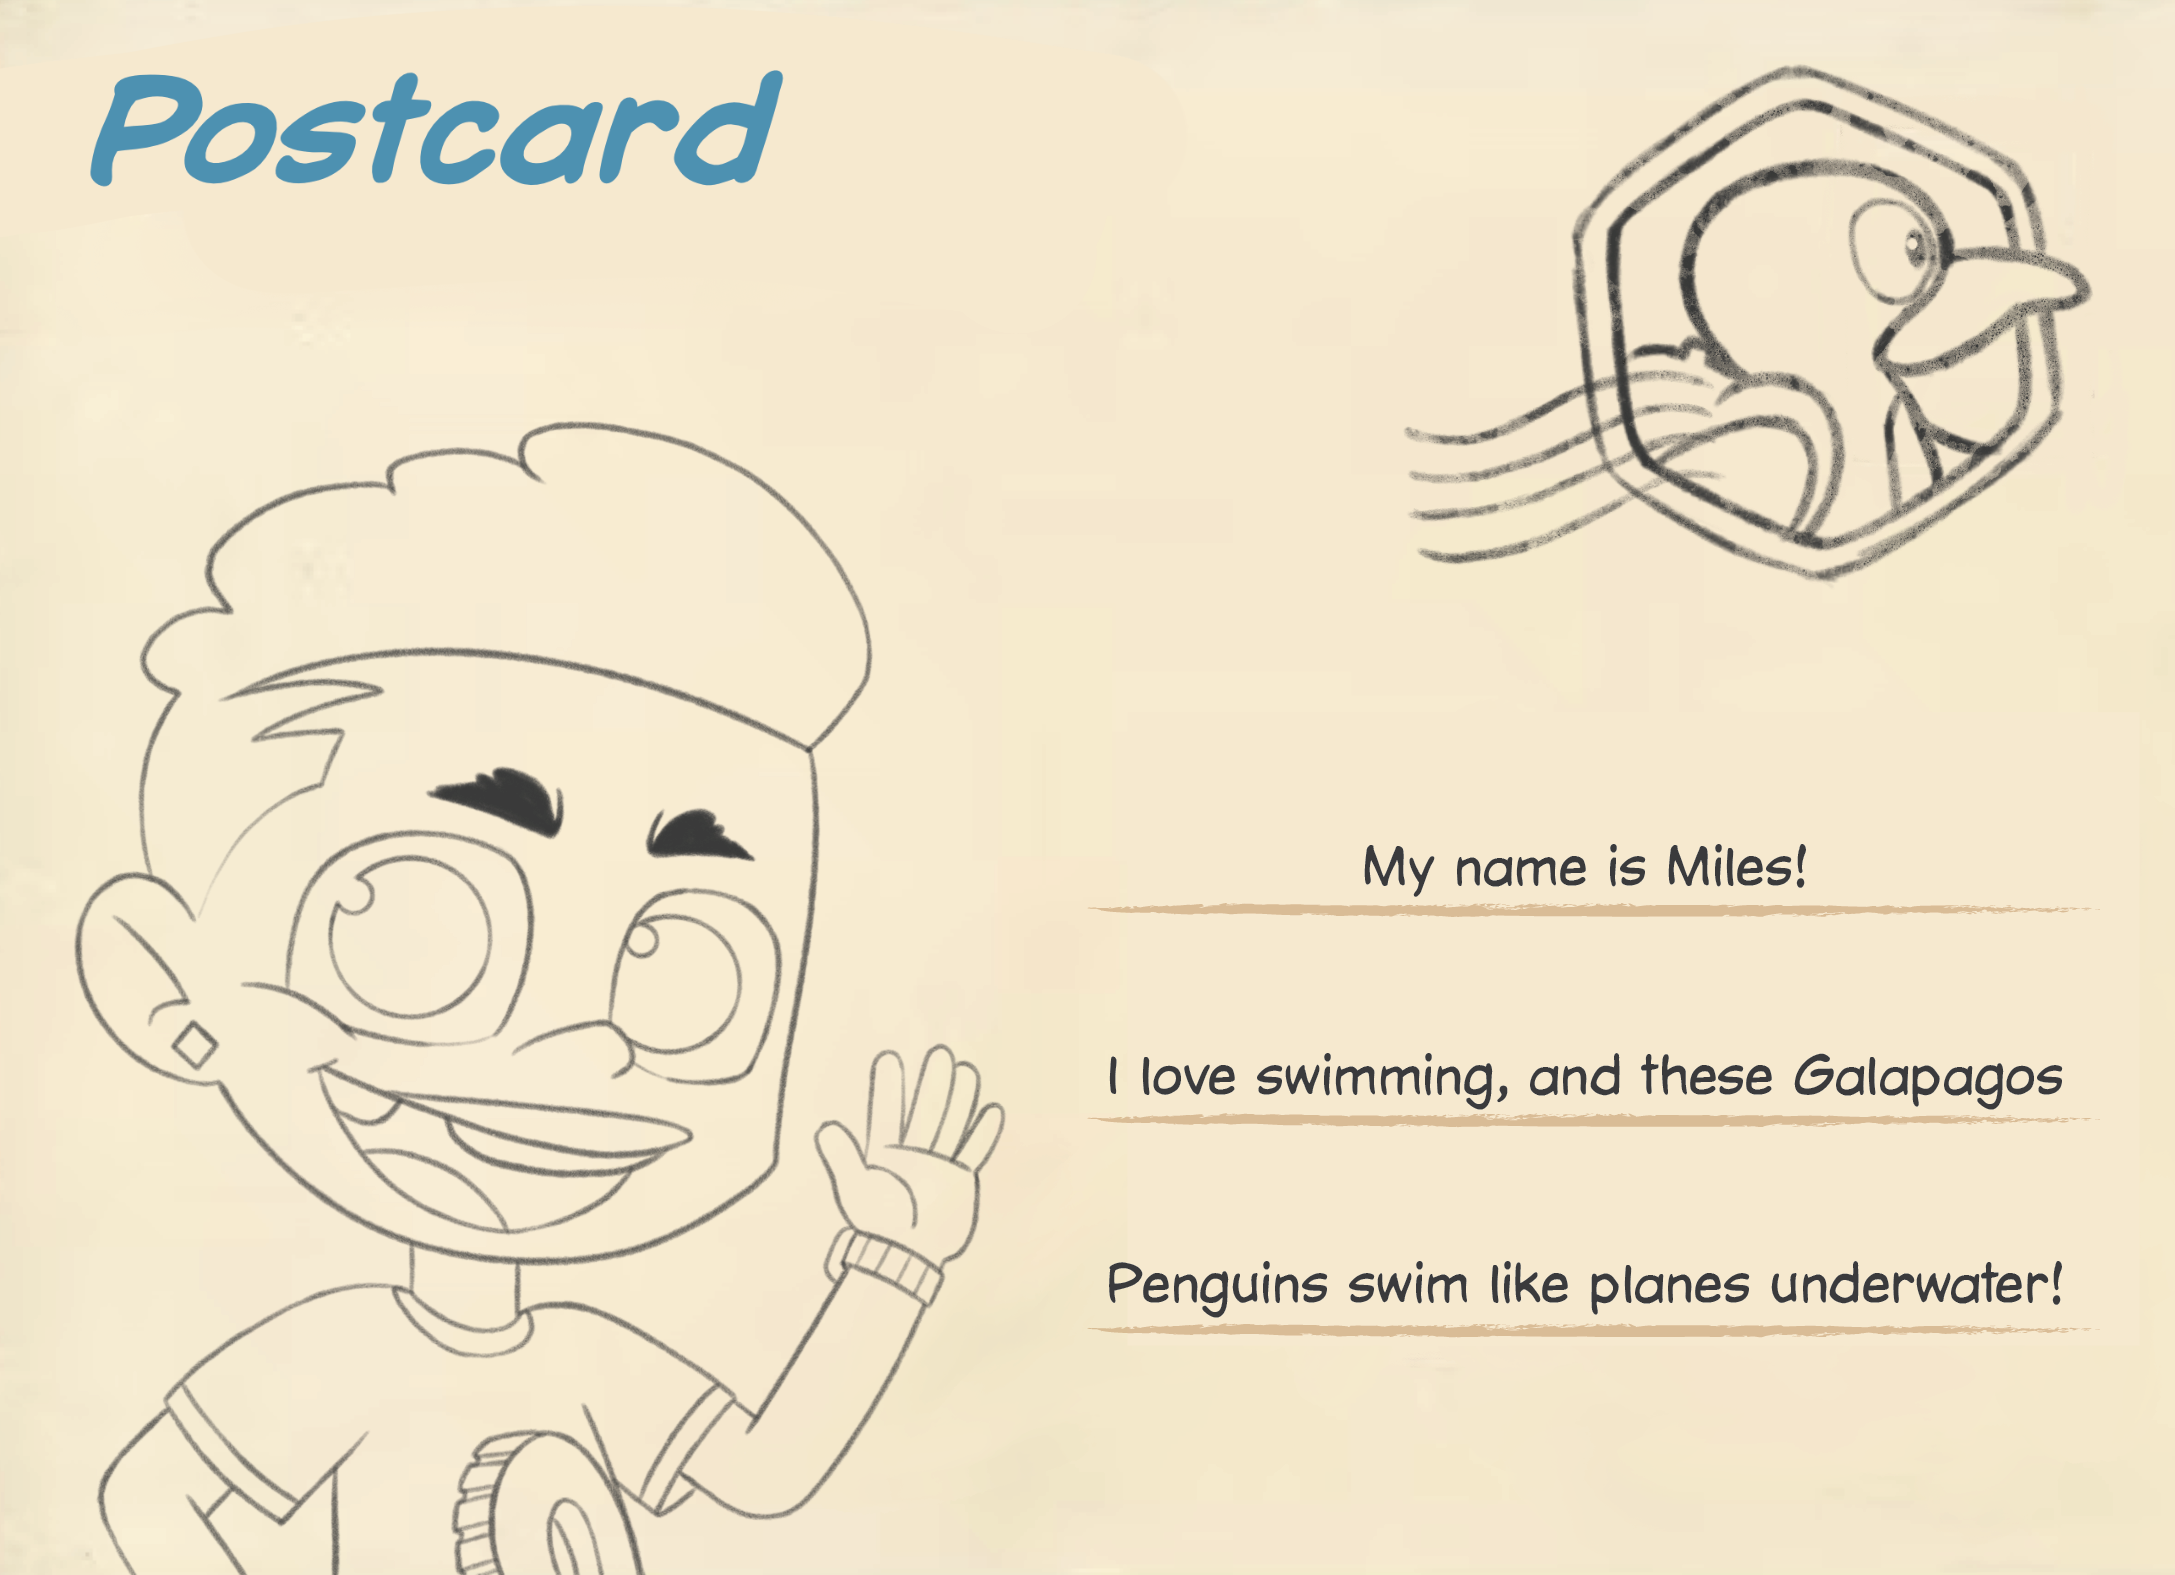 A postcard with My name is Miles! I love swimming and these Galapagos Penguins swim like planes underwater! written on it